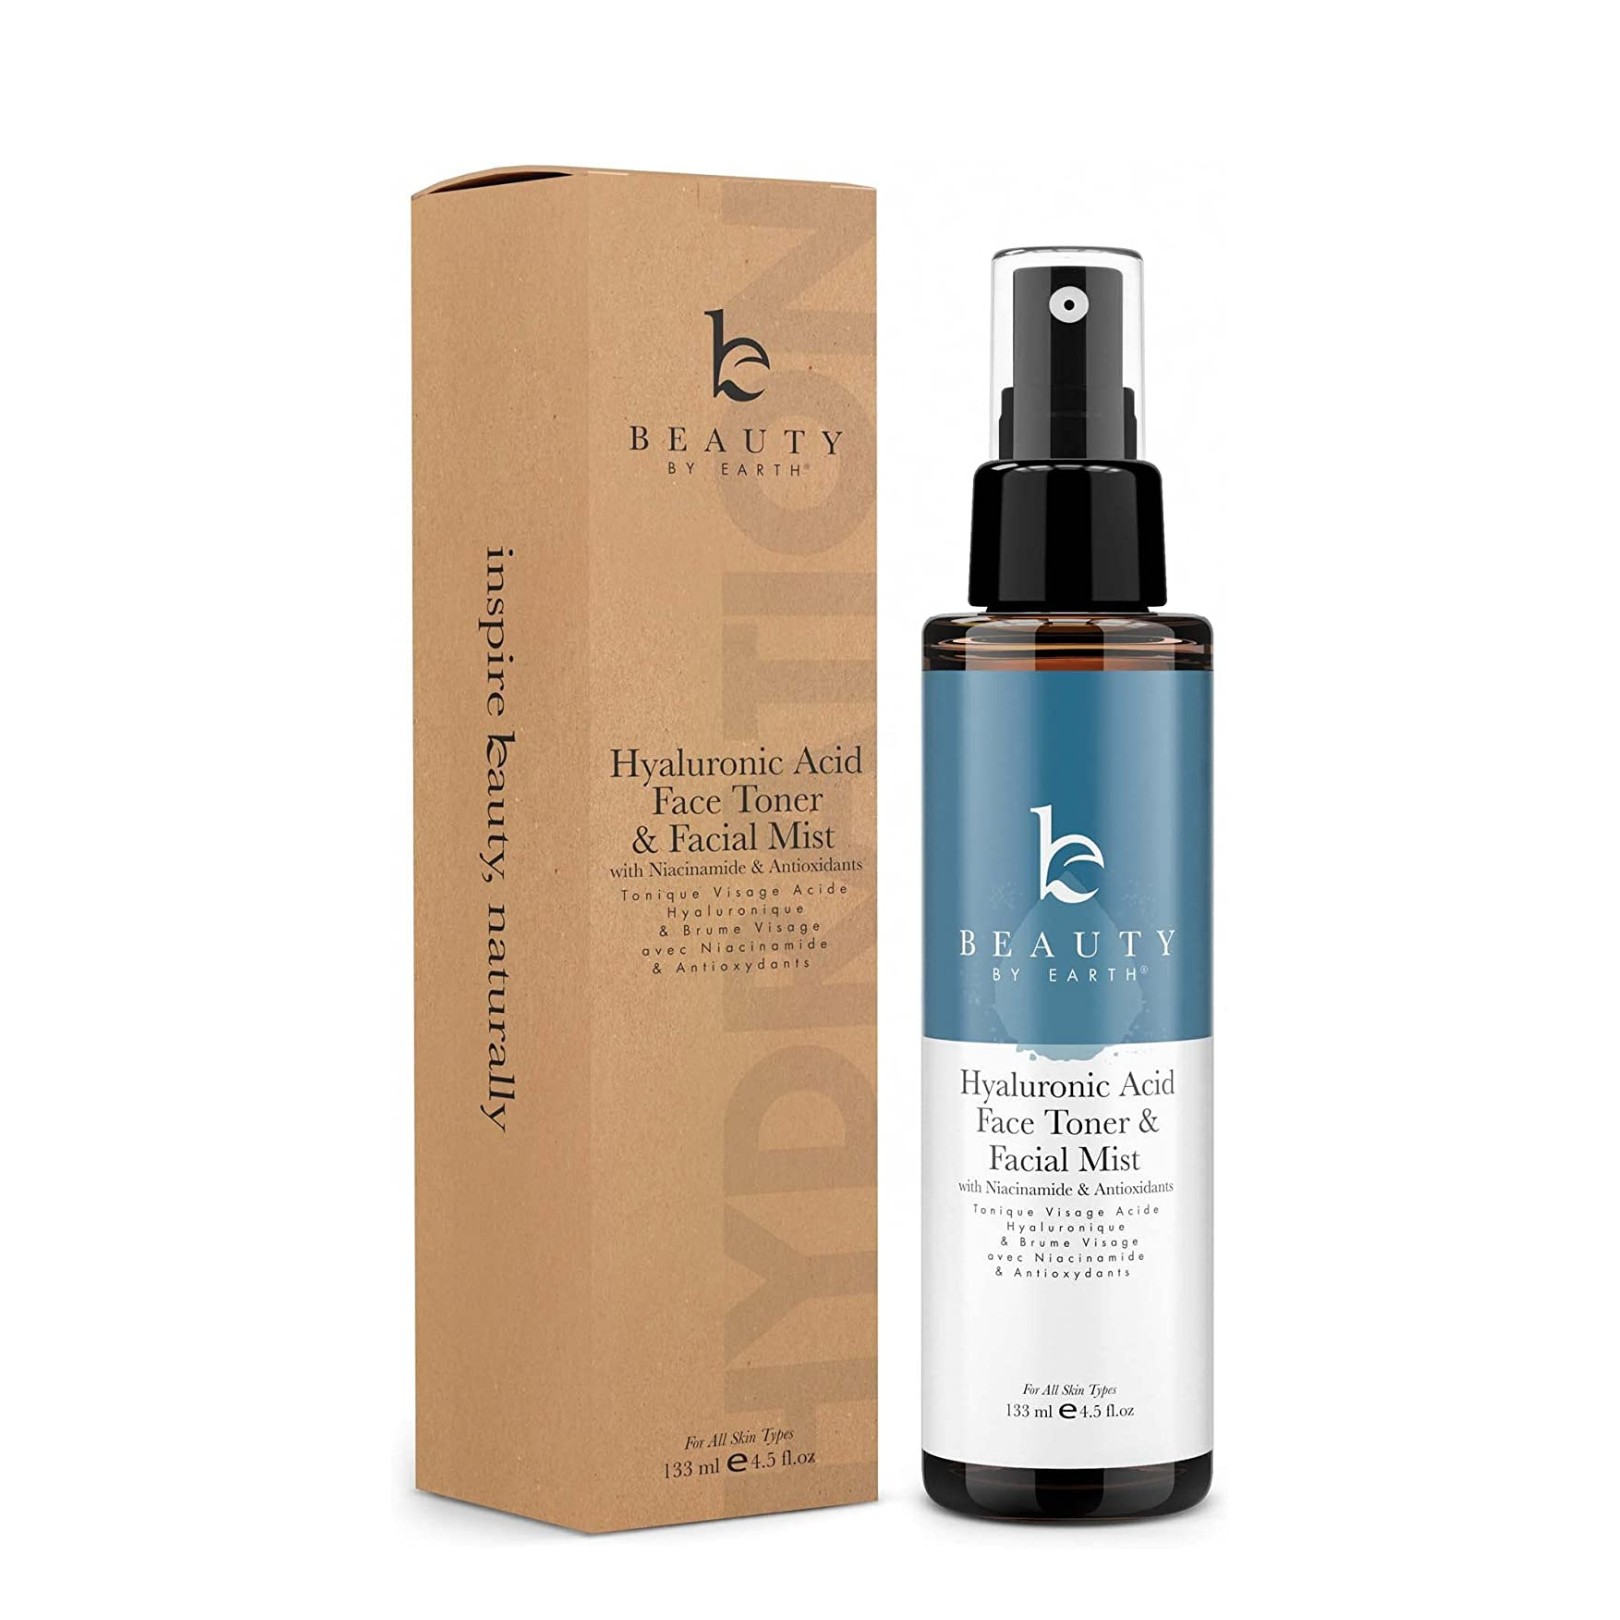 Beauty By Earth Hyaluronic Acid Face Toner and Facial Mist 1